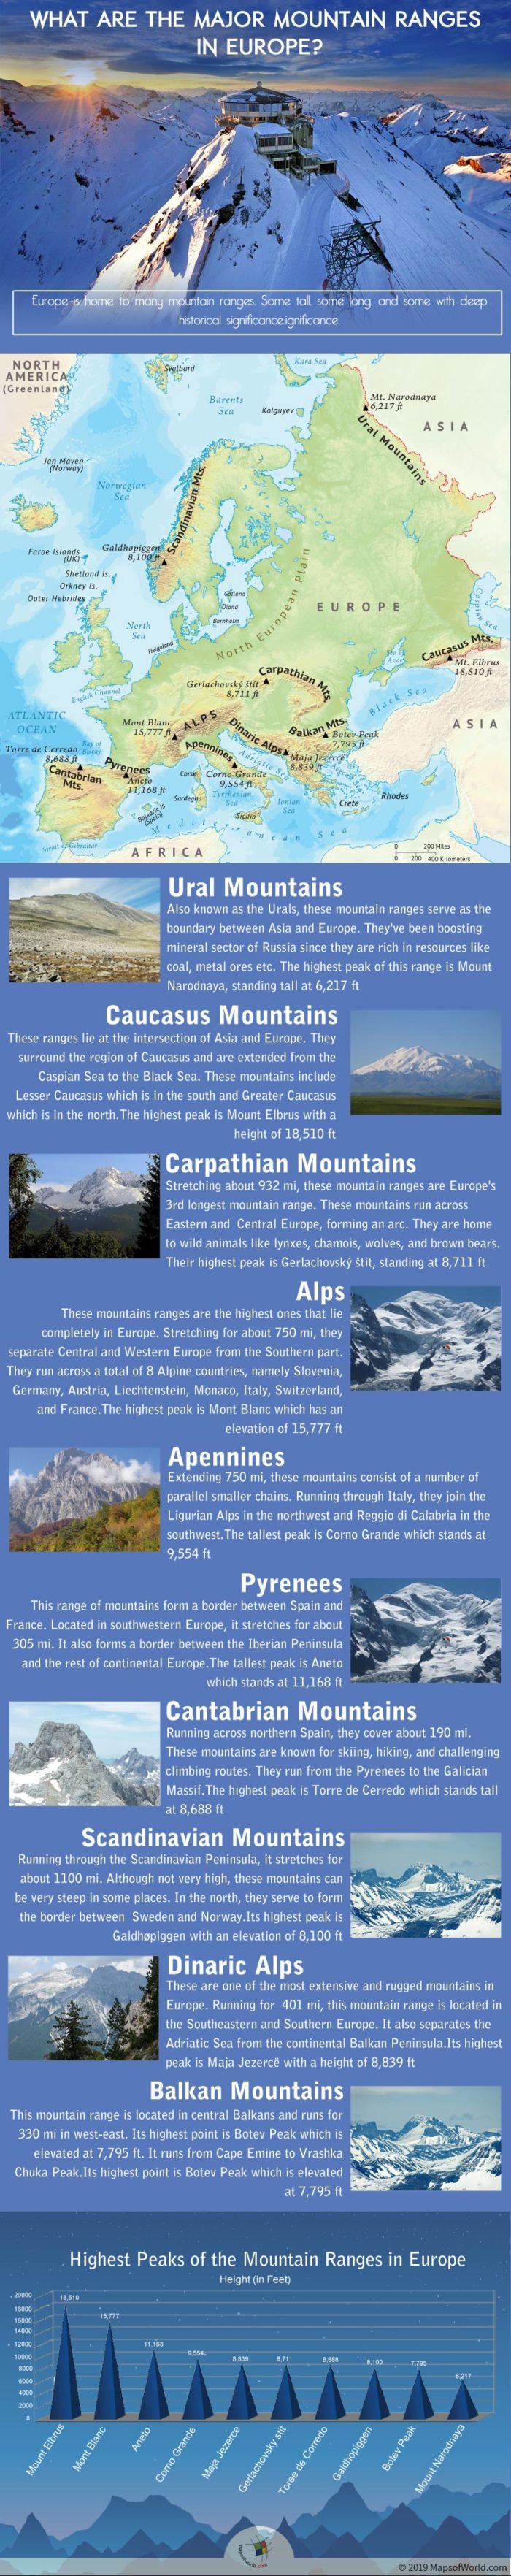 Infographic Giving Details of Major Mountain Ranges of Europe